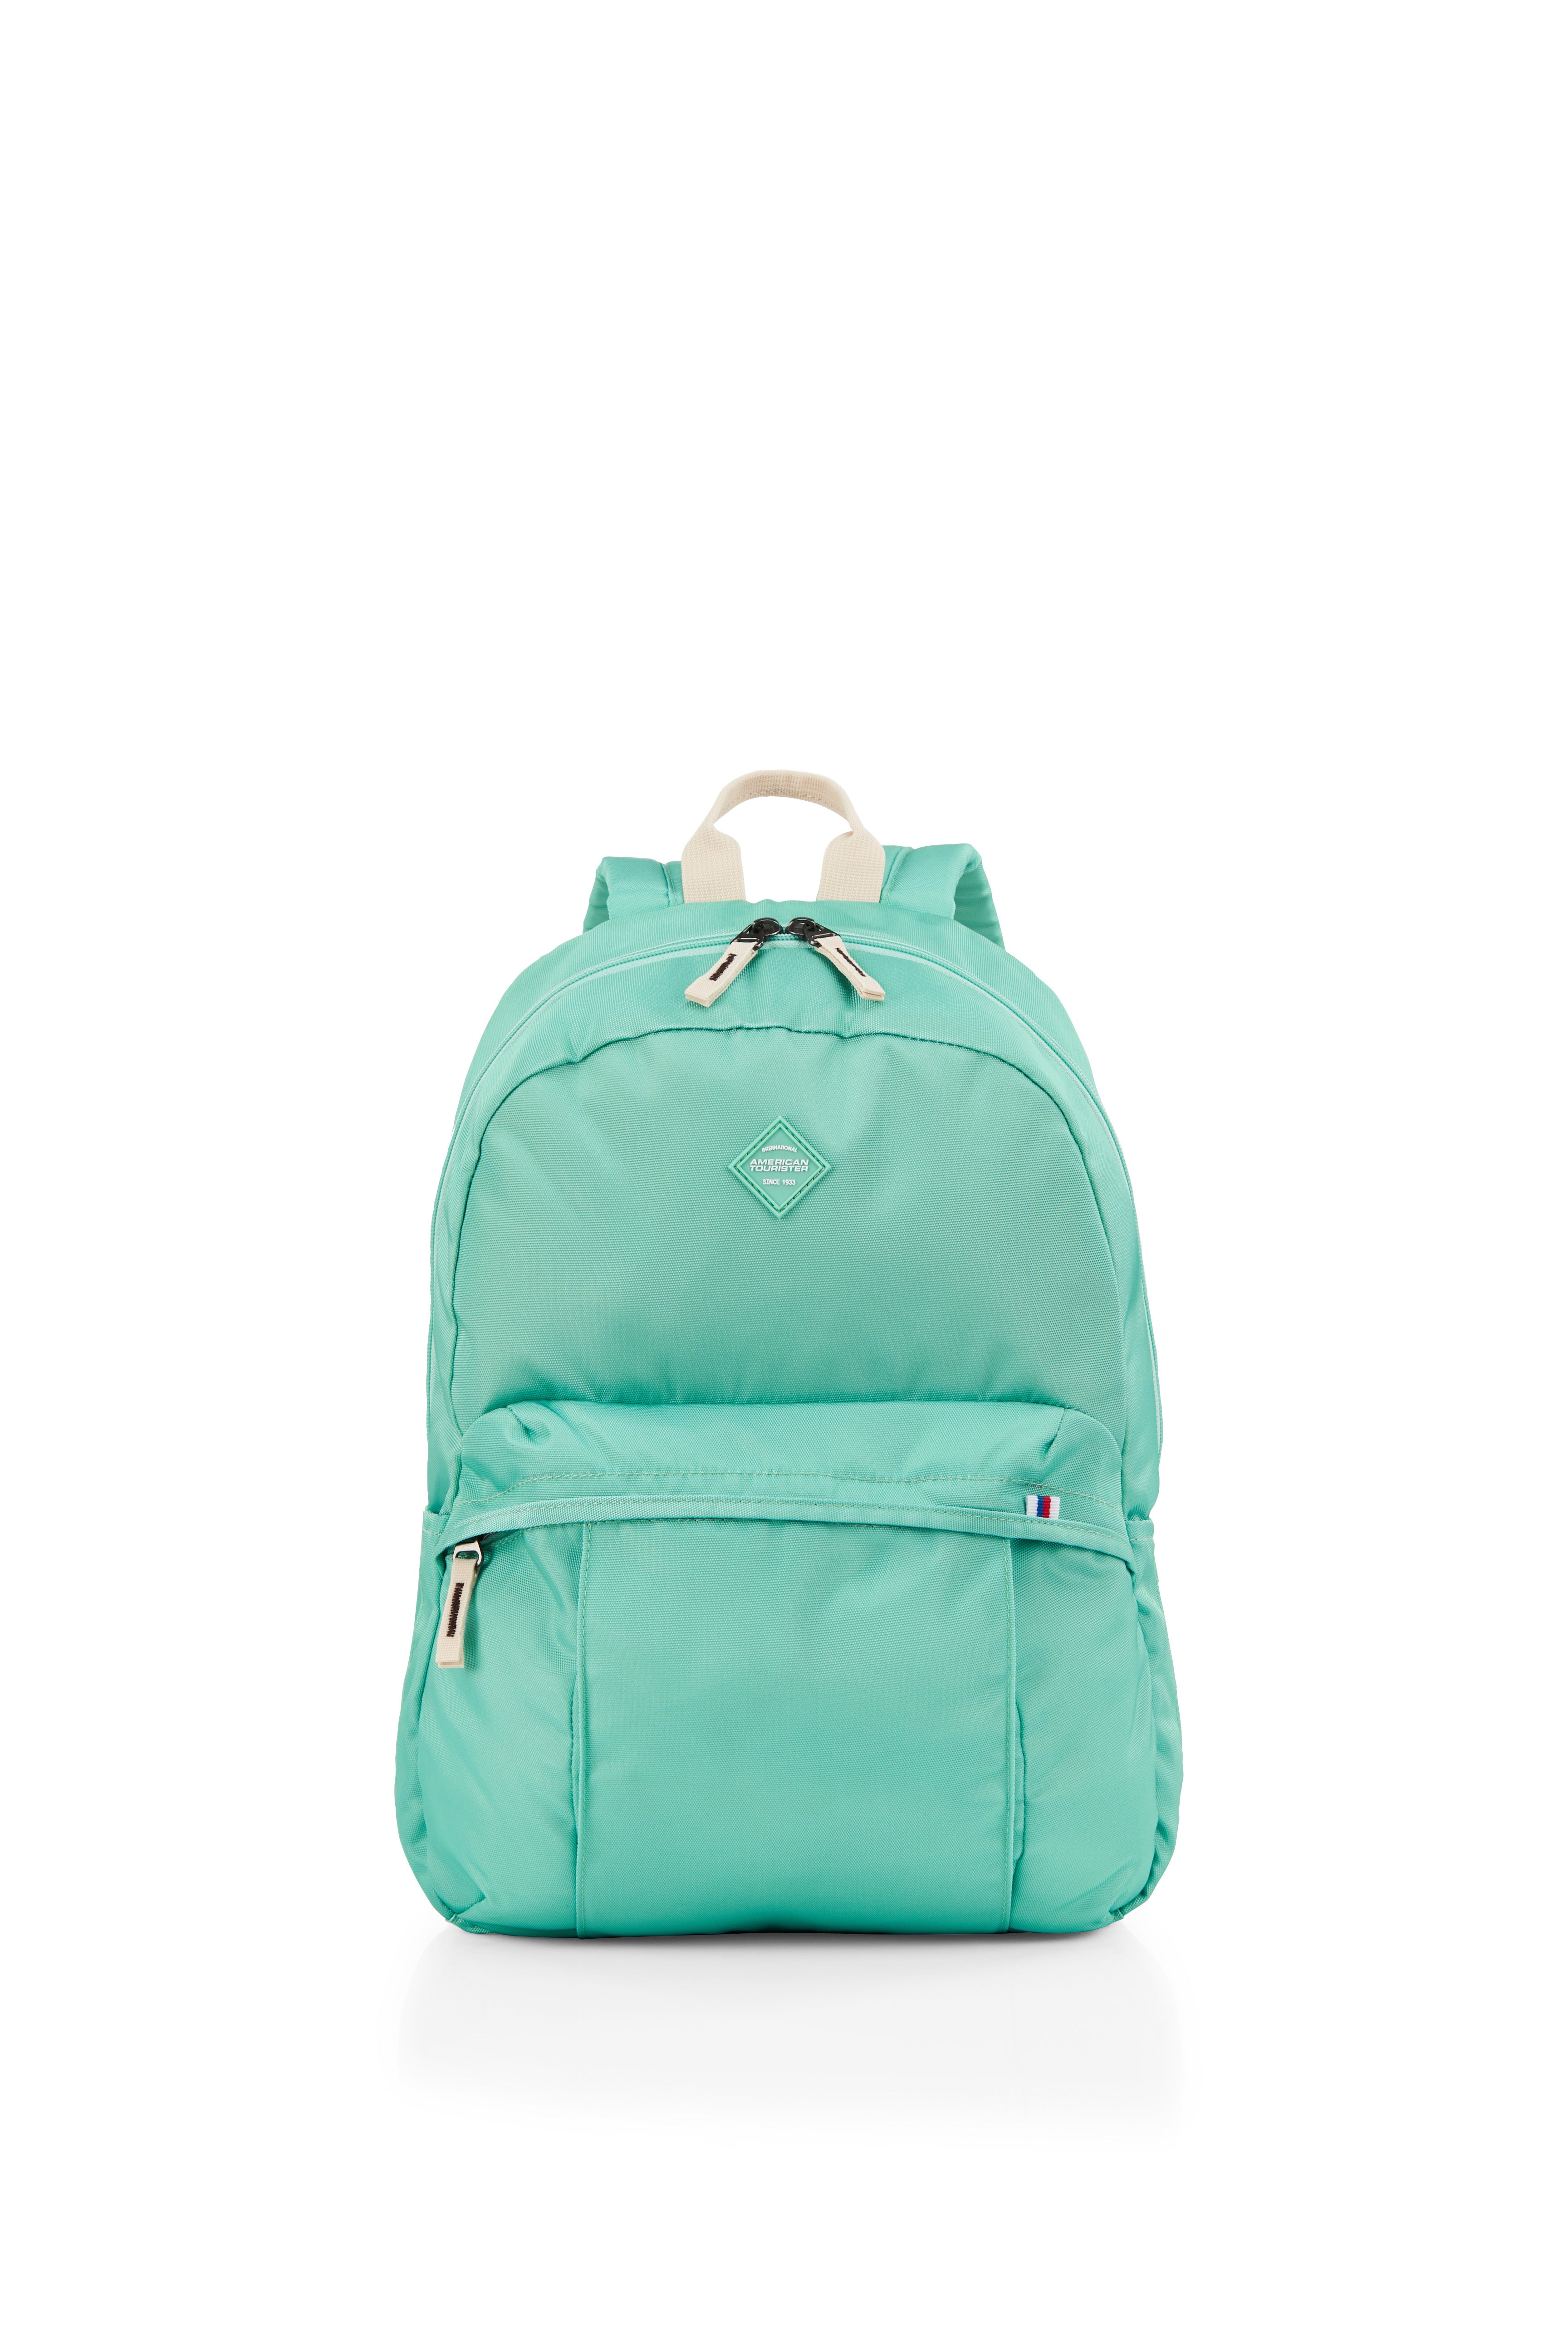 American Tourister - RUDY Small Fashion Backpack - Ice Mint-2